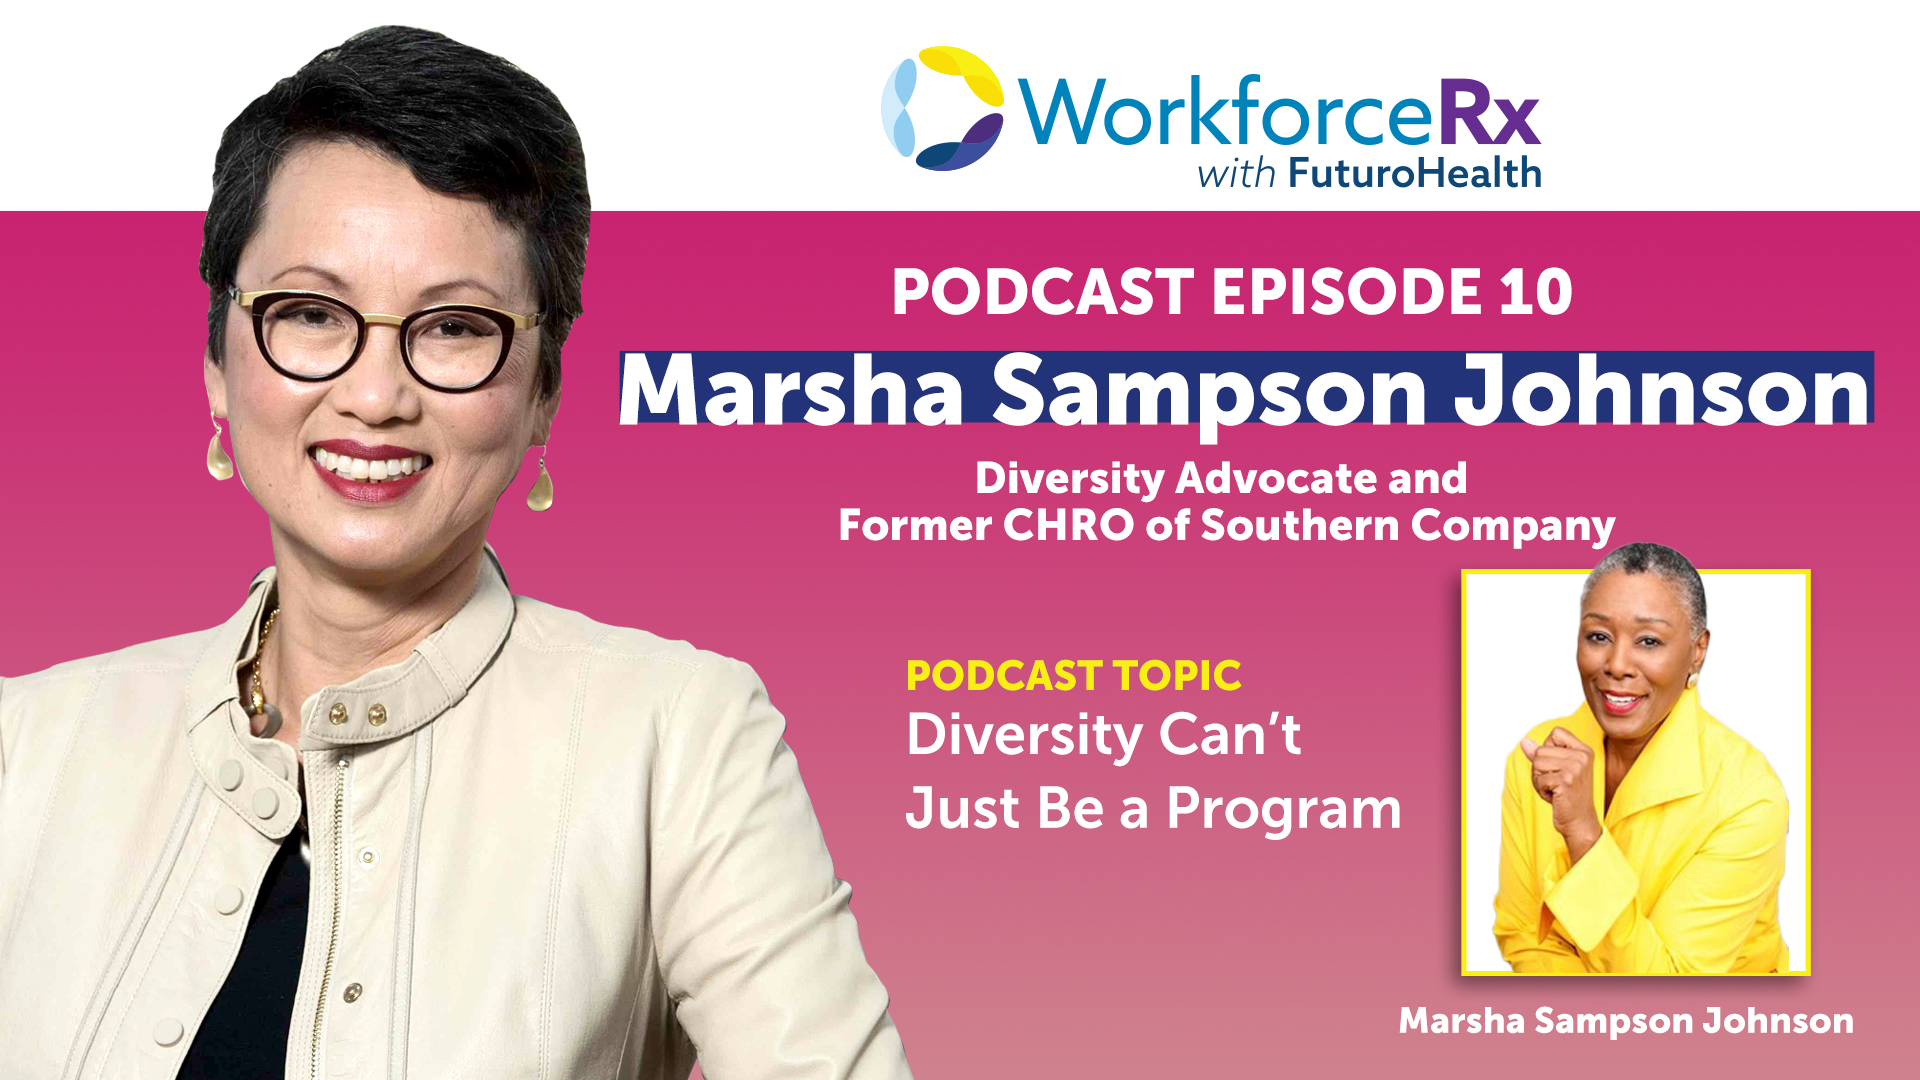 Marsha Sampson Johnson, Diversity Advocate and Former CHRO of Southern Company: Diversity Can’t Just Be a Program